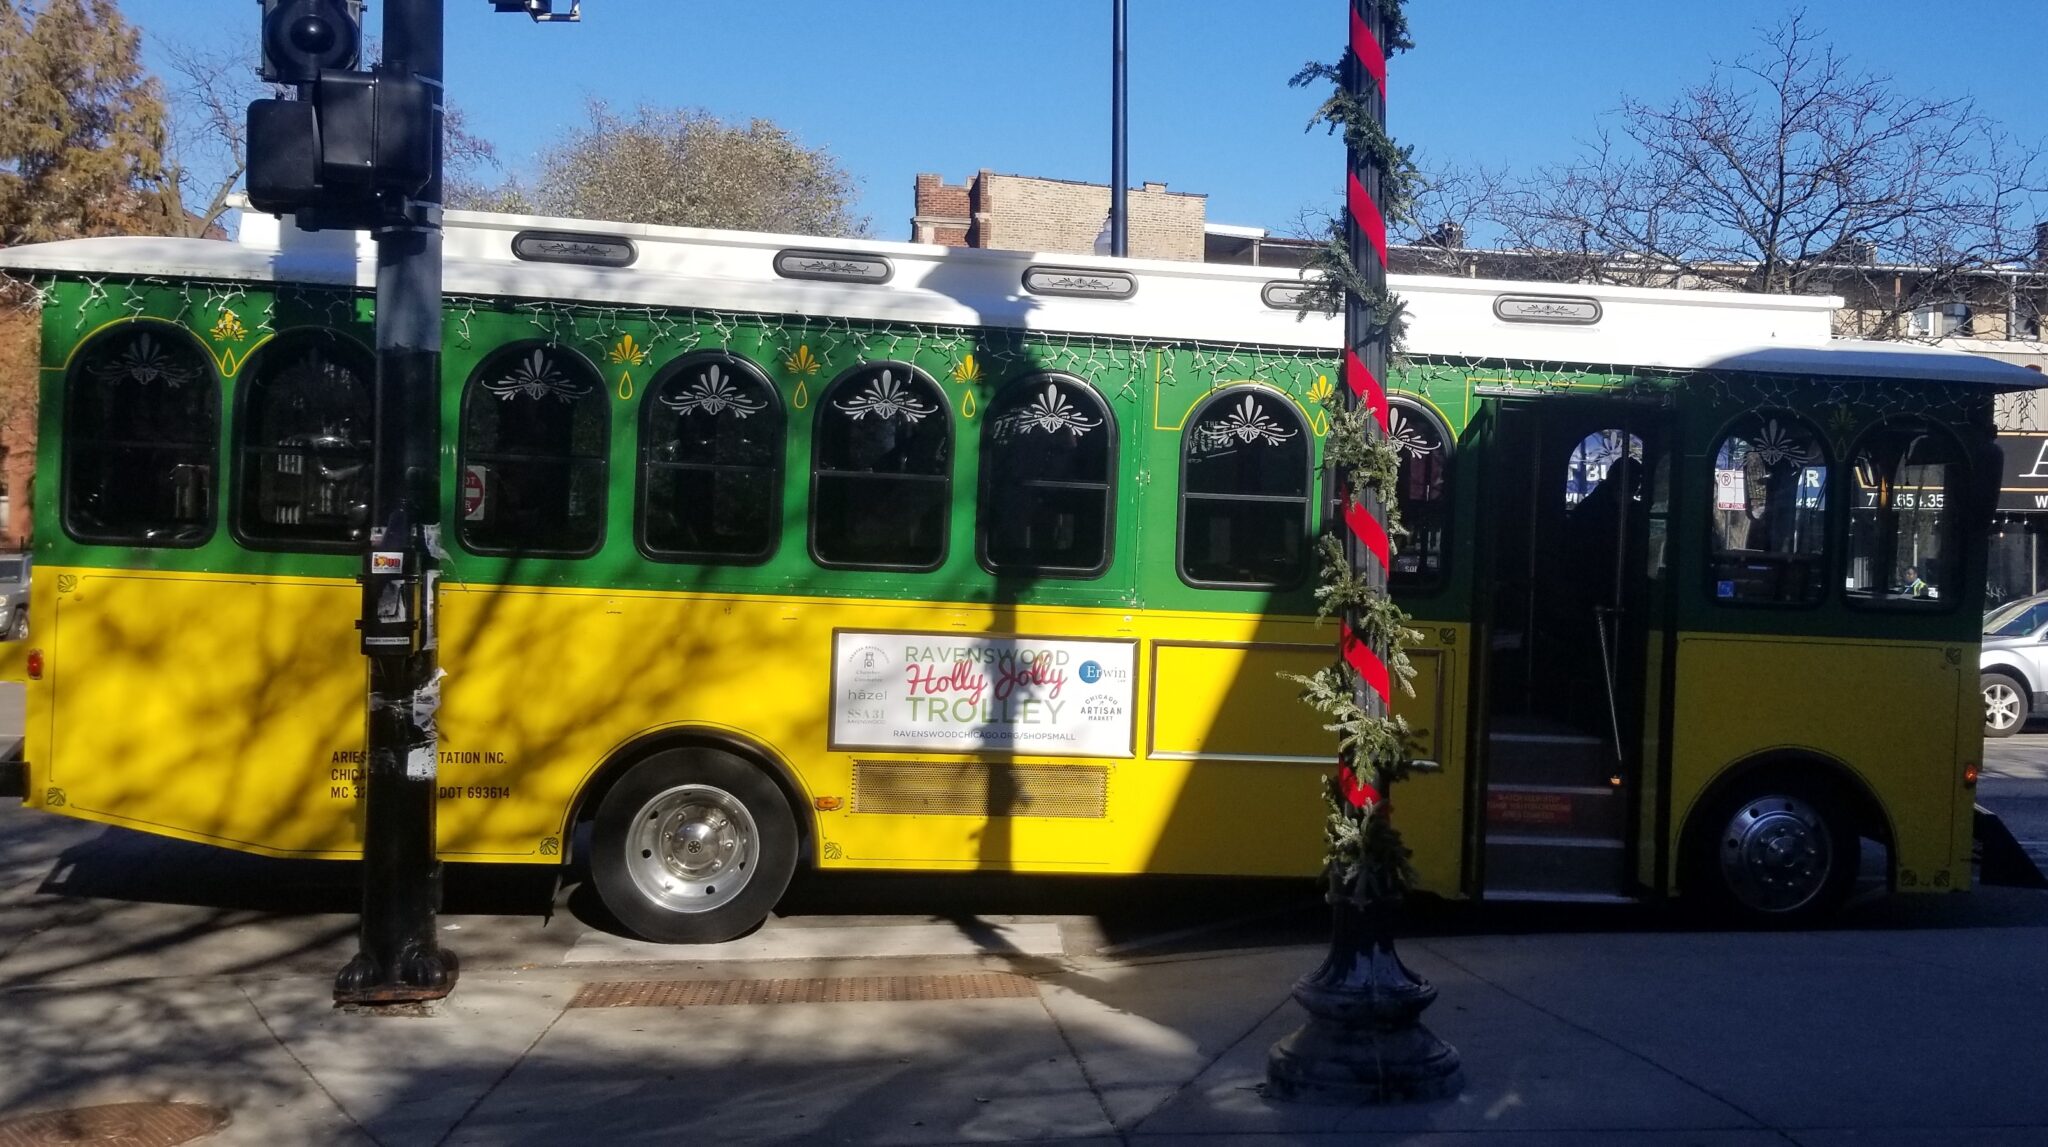 a holiday trolley in the streets of the Ravenswood neighborhood in Chicago